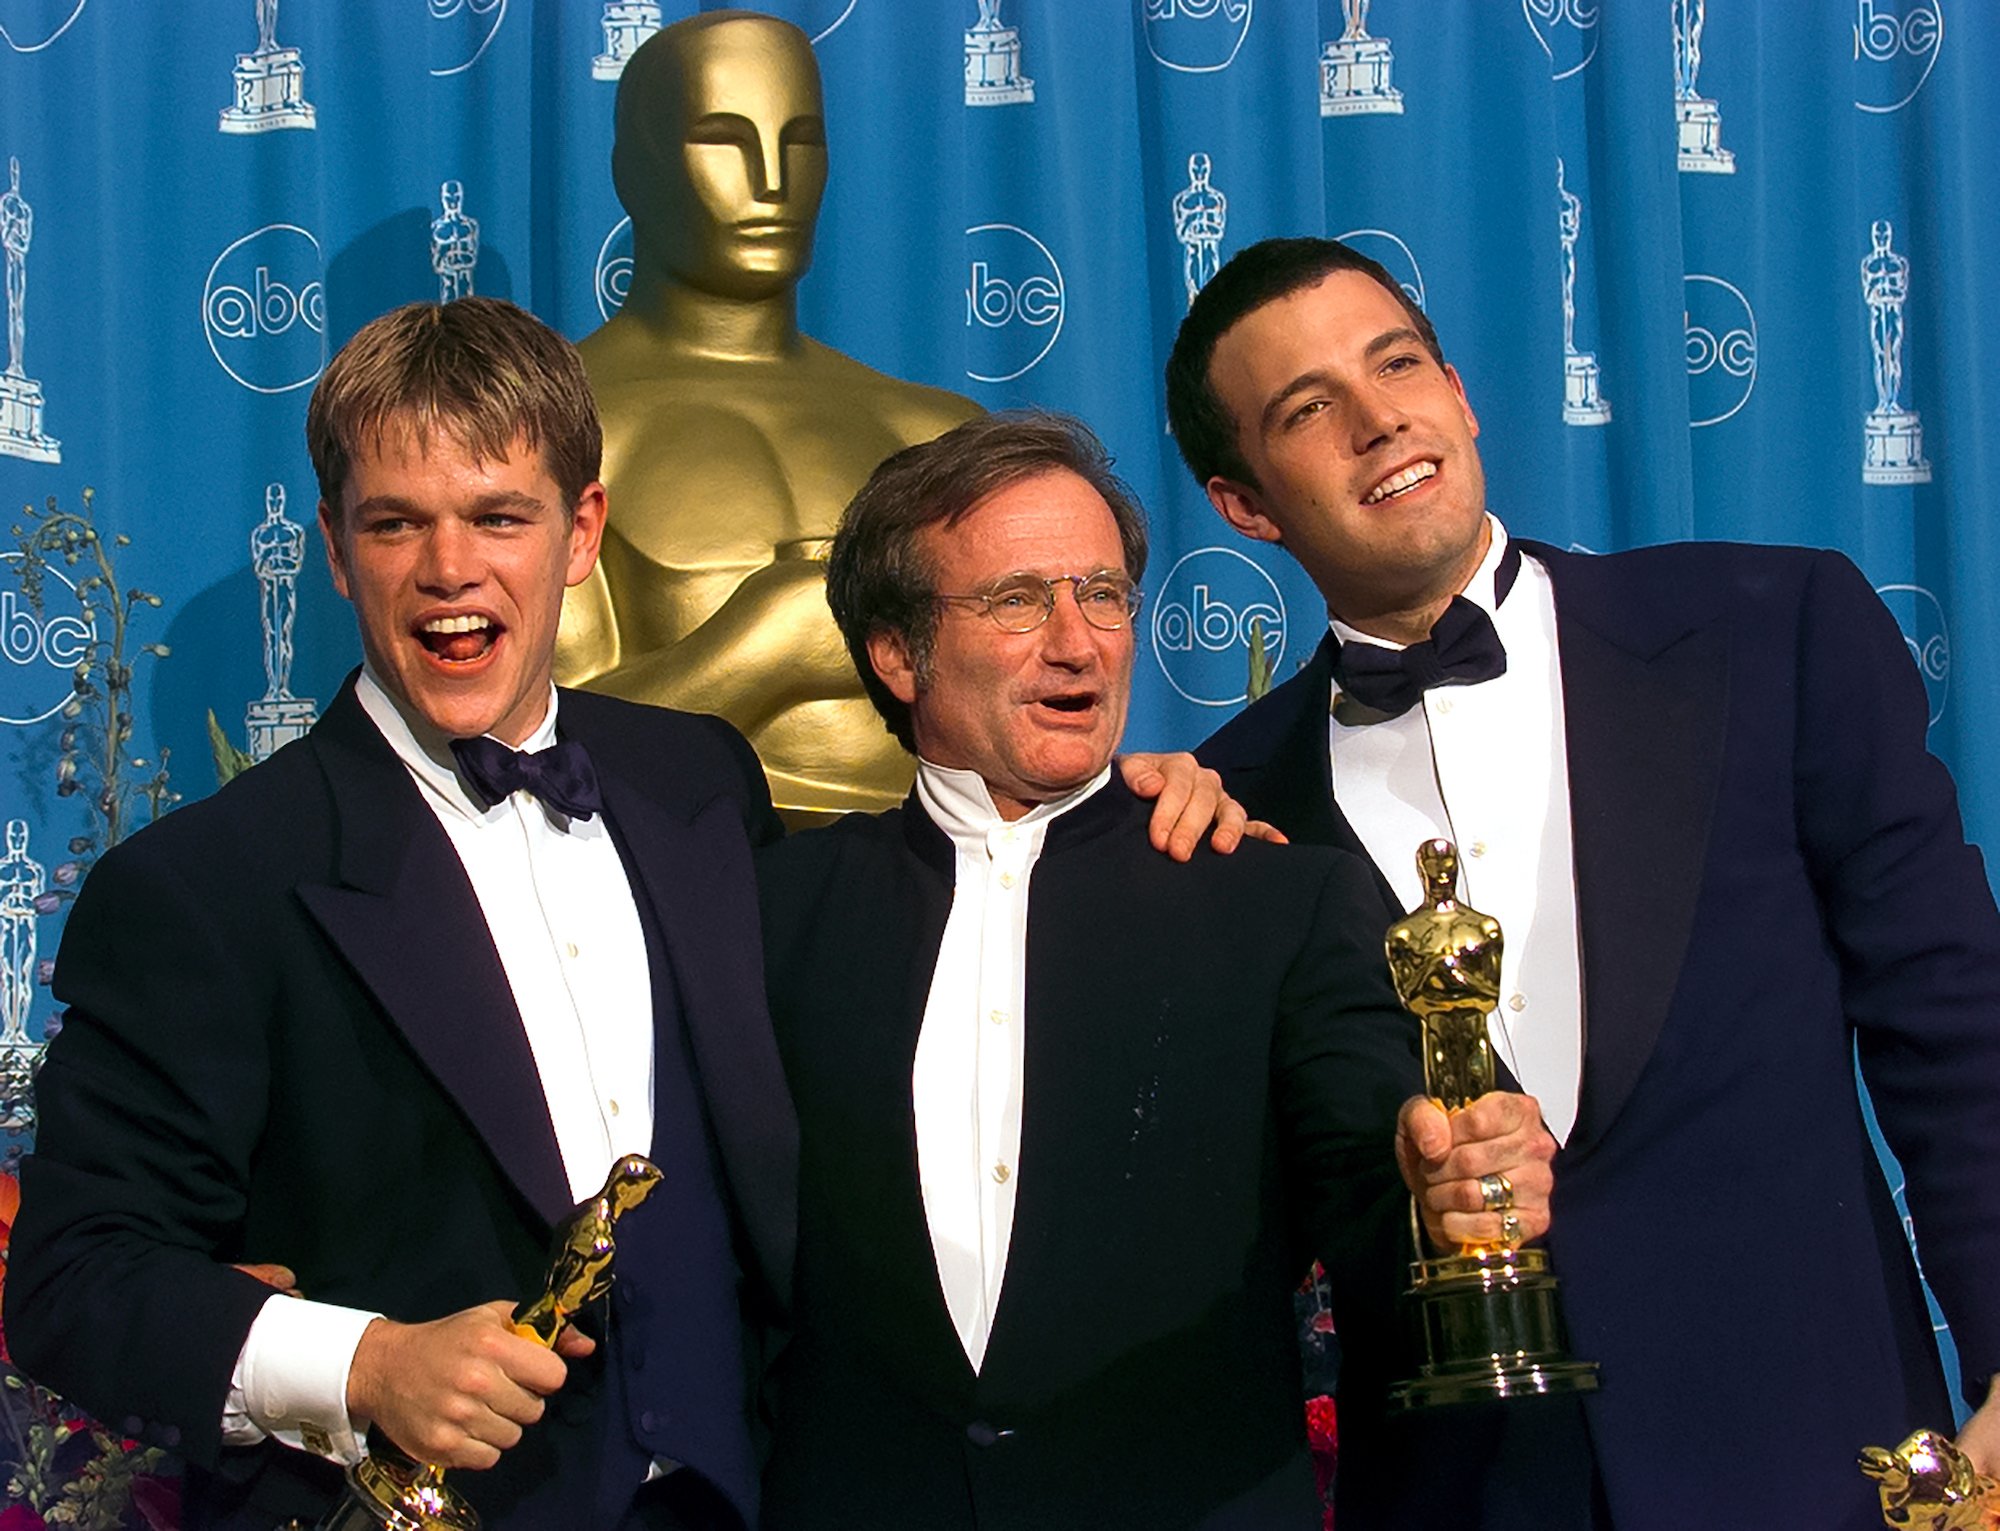 Robin Williams joins winners Ben Affleck and Matt Damon backstage at Academy Awards Show, March 23, 1998. Robin Williams on for his role in 'Good Will Hunting'